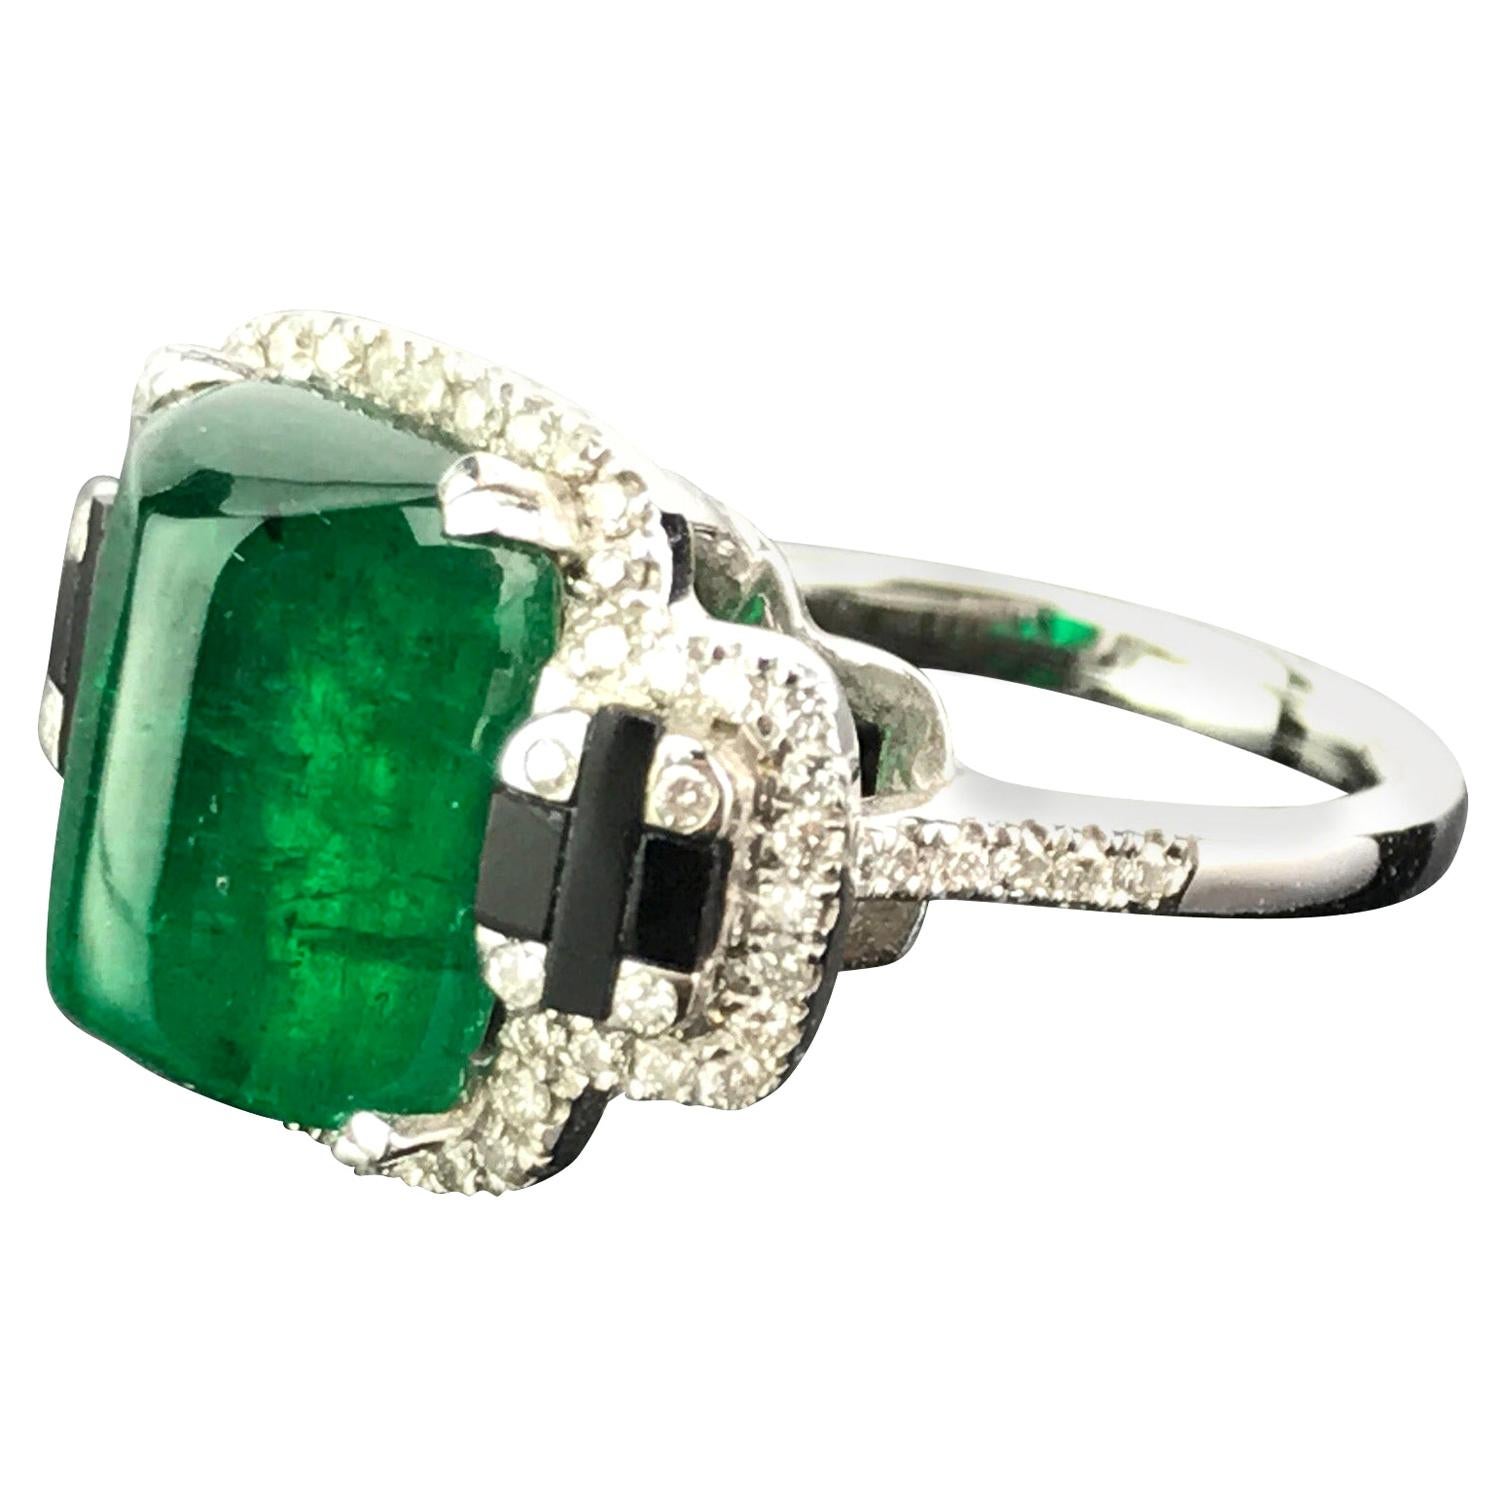 5.62 Carat Sugarloaf Shaped Emerald, Diamond and Black Onyx Cocktail Ring